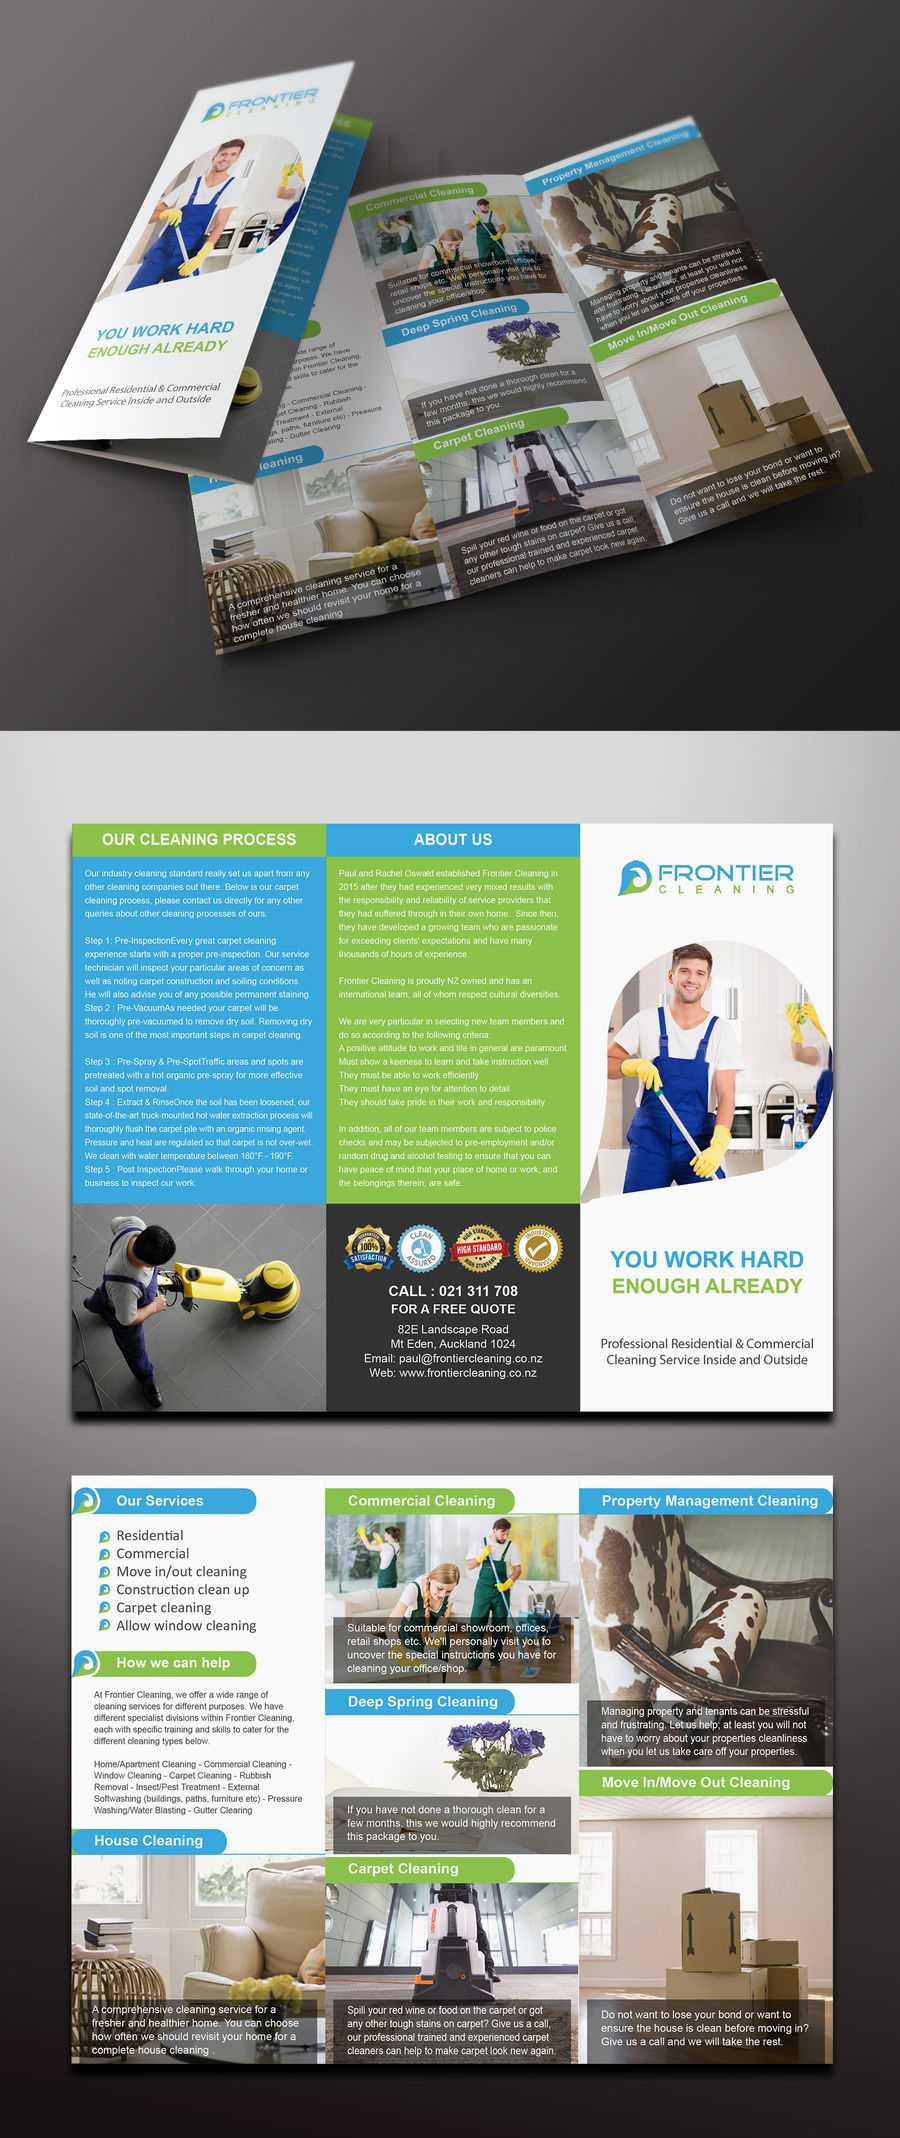 Entry #74Mamun313 For Design A 3 Fold Brochure, Business Regarding Commercial Cleaning Brochure Templates